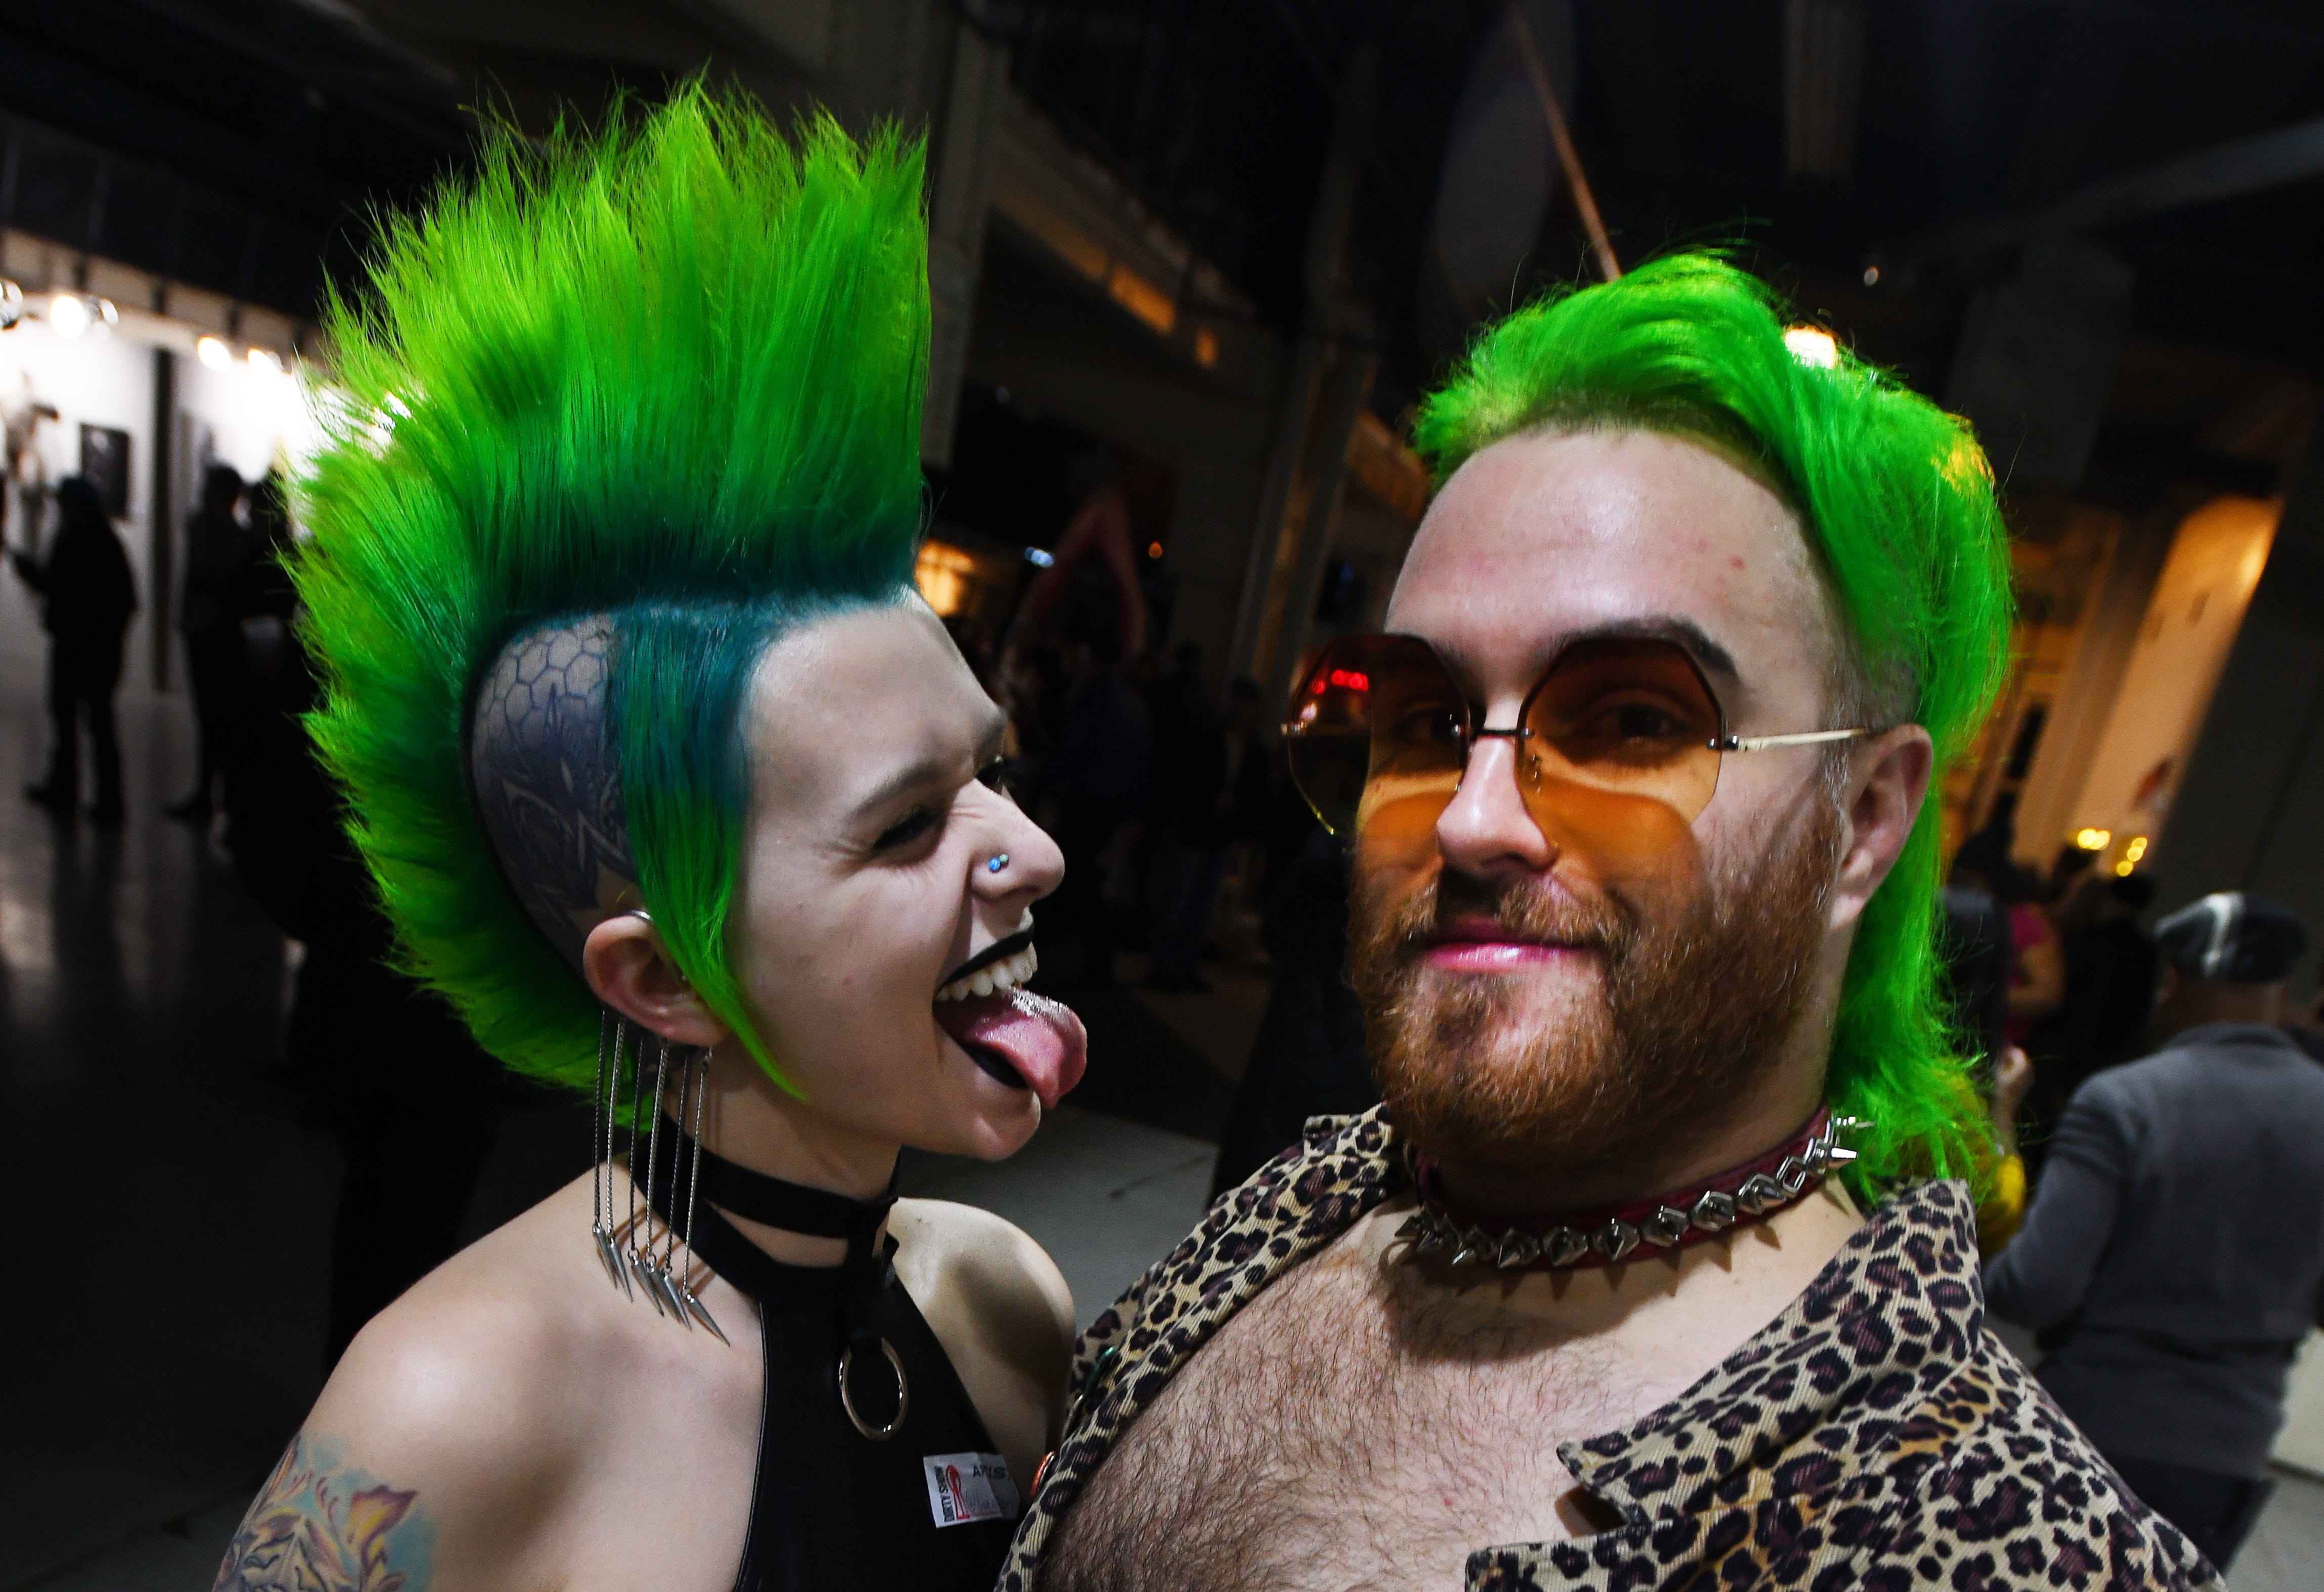 Olivia Dixon and Ignatius Wolf are pretty in green at The Dirty Show.